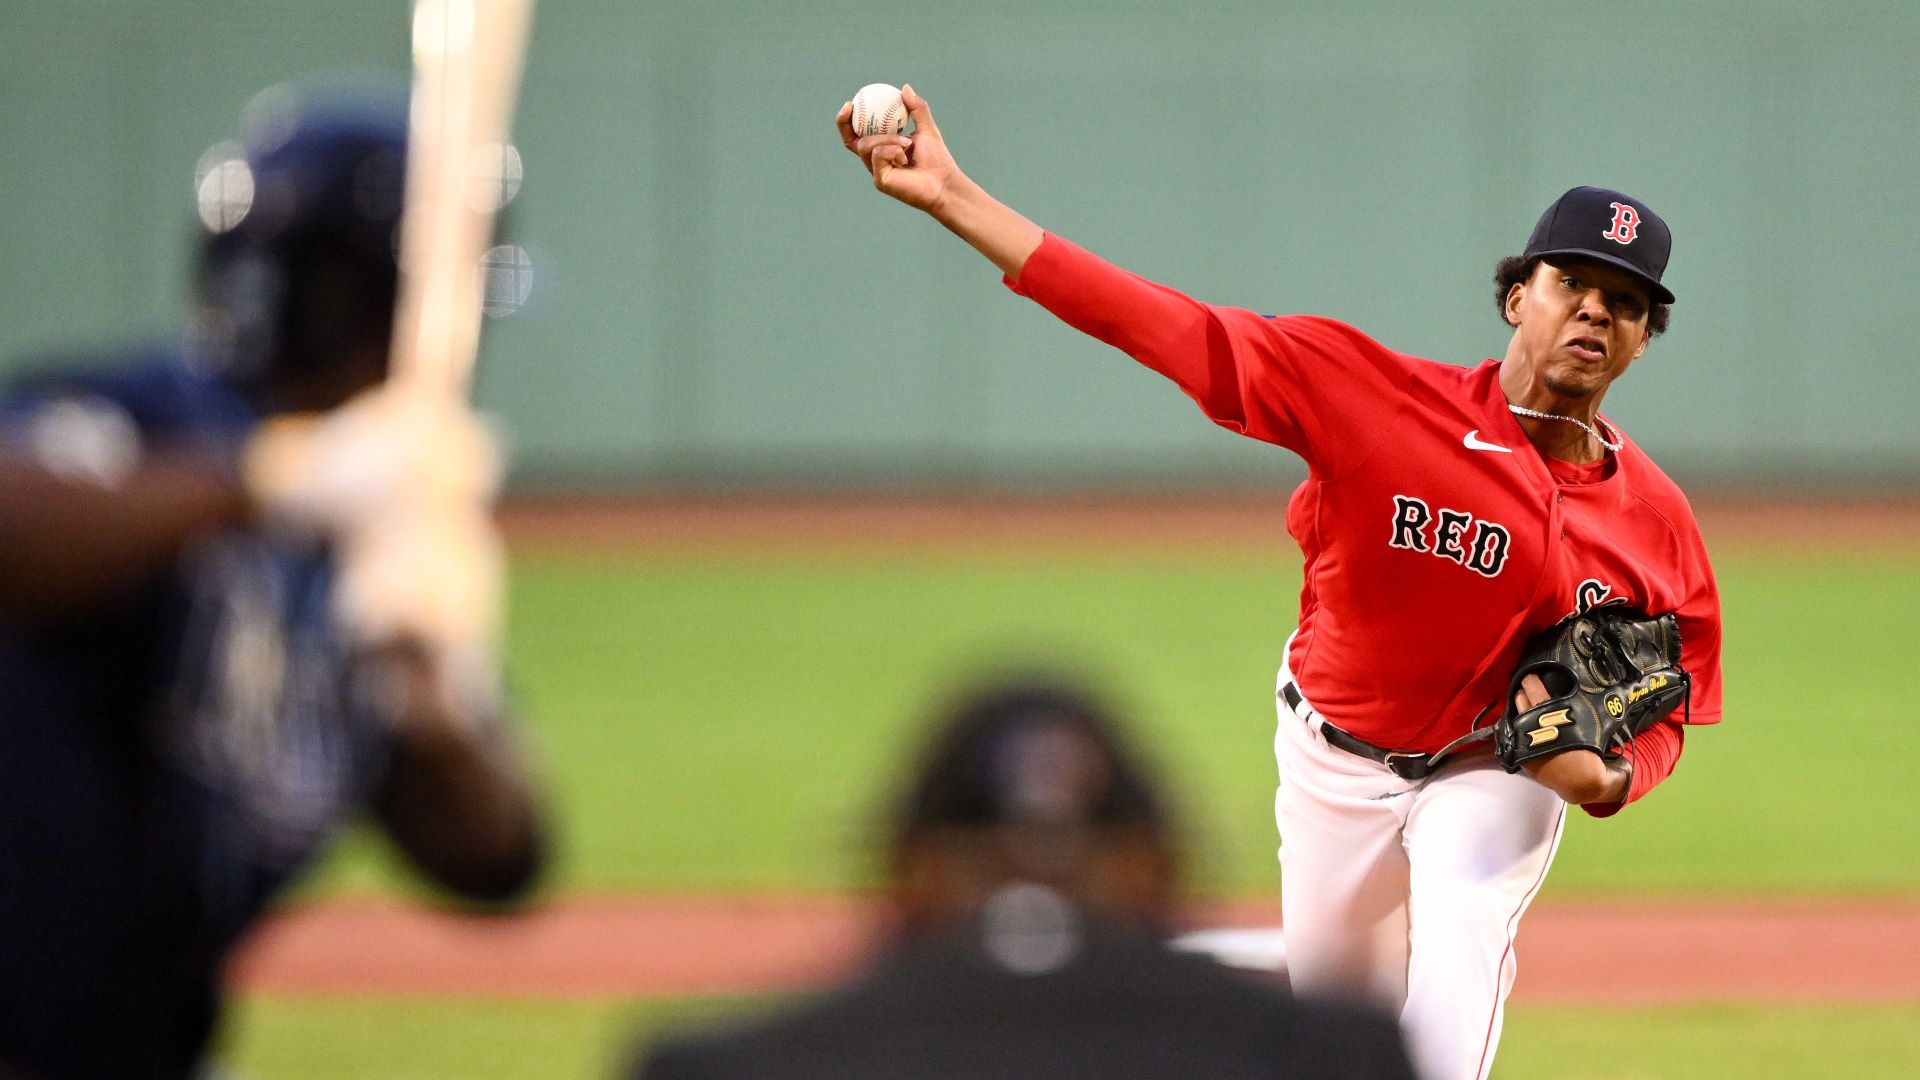 Brayan Bello Boosts Red Sox In Bounce Back Start